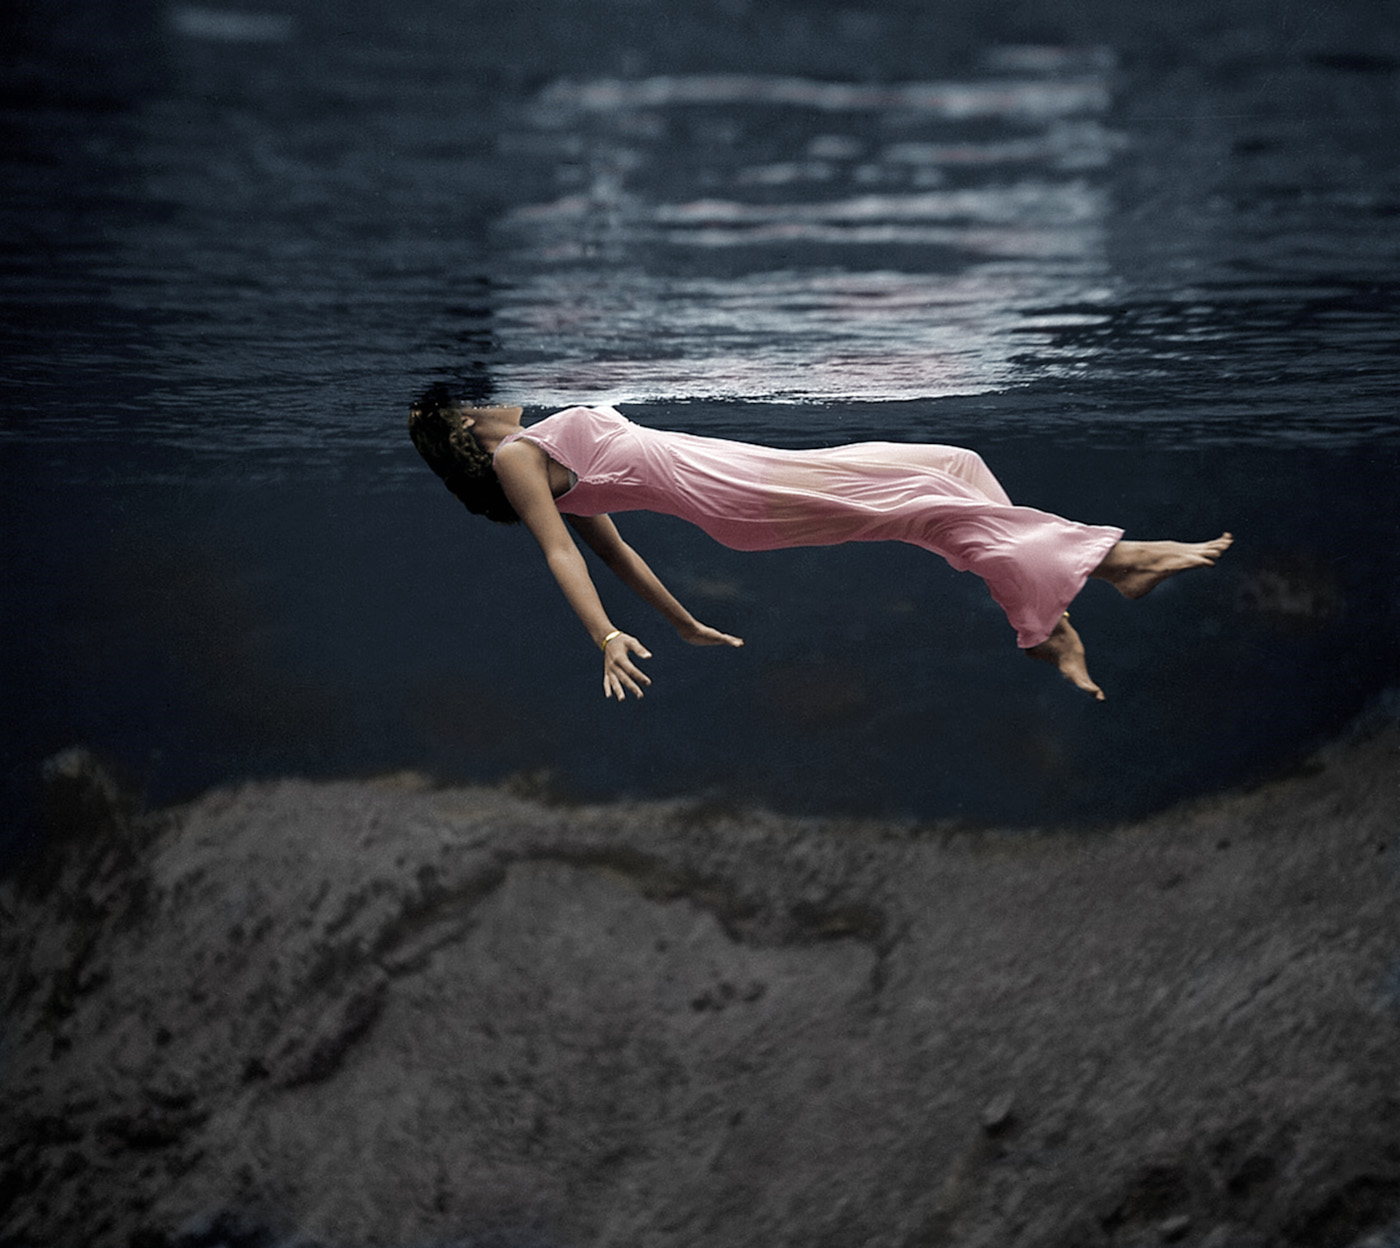 A colorized version of "Lady in the Water." The image was shot by fashion photographer Toni Frissell and was published in Harper's Bazaar in December 1947. View full size.